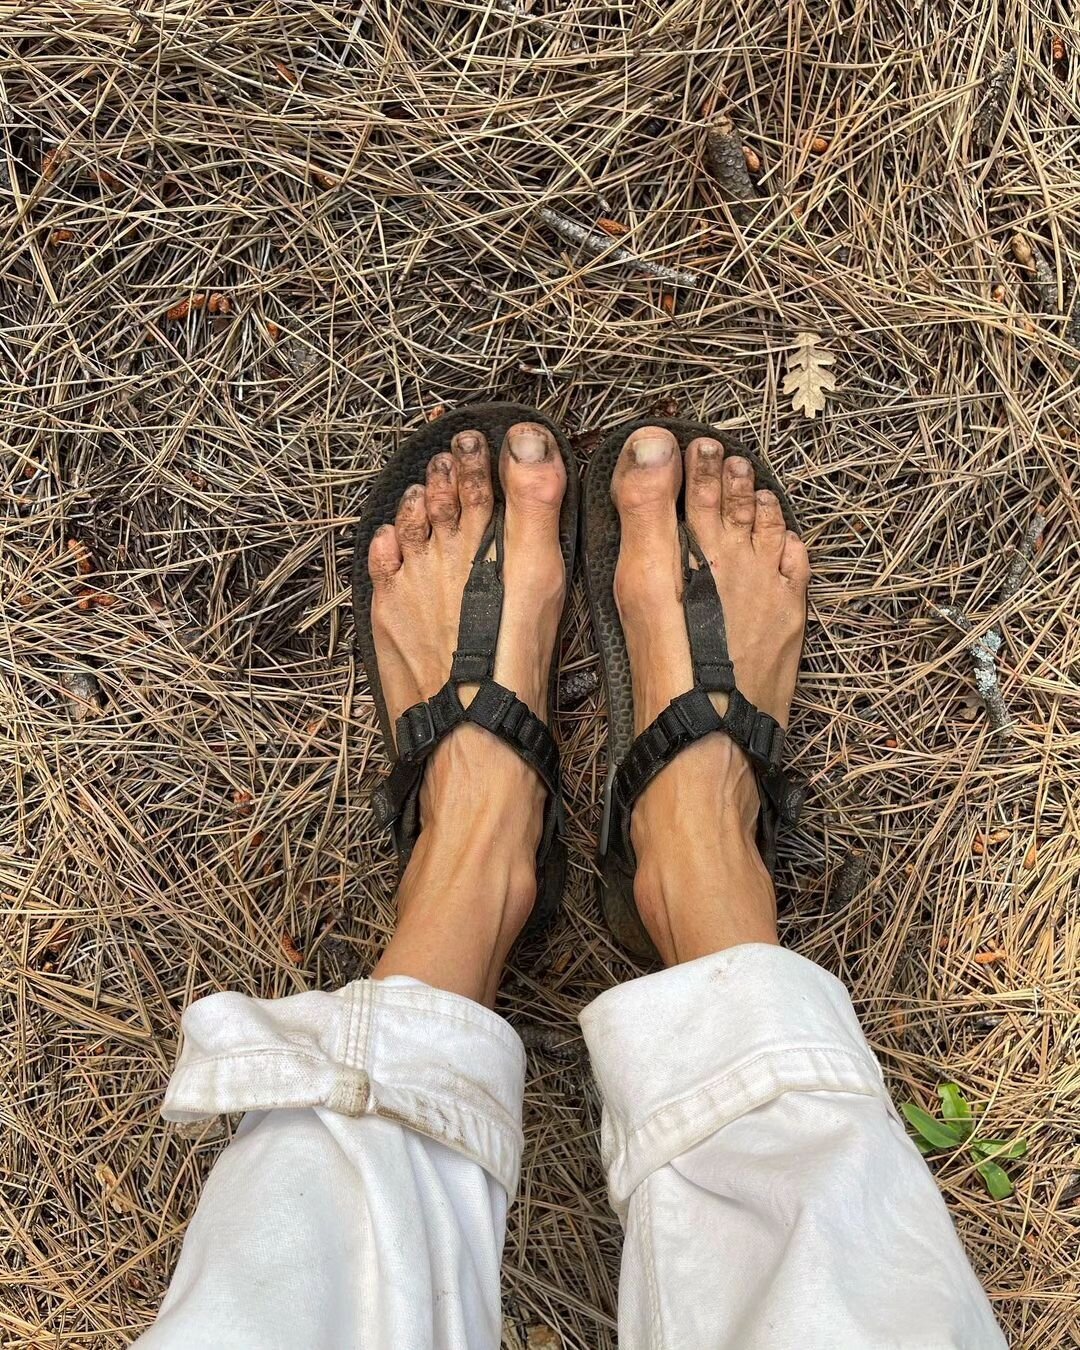 Bit of warmer weather this weekend means it's times to chuck your @bedrocksandals on and get dirty!

#bedrocksandals #bedrock #dirtbag #hiking #exploreaustralia #torquay #geelong #melbourne #dirtbaglife #madeinusa